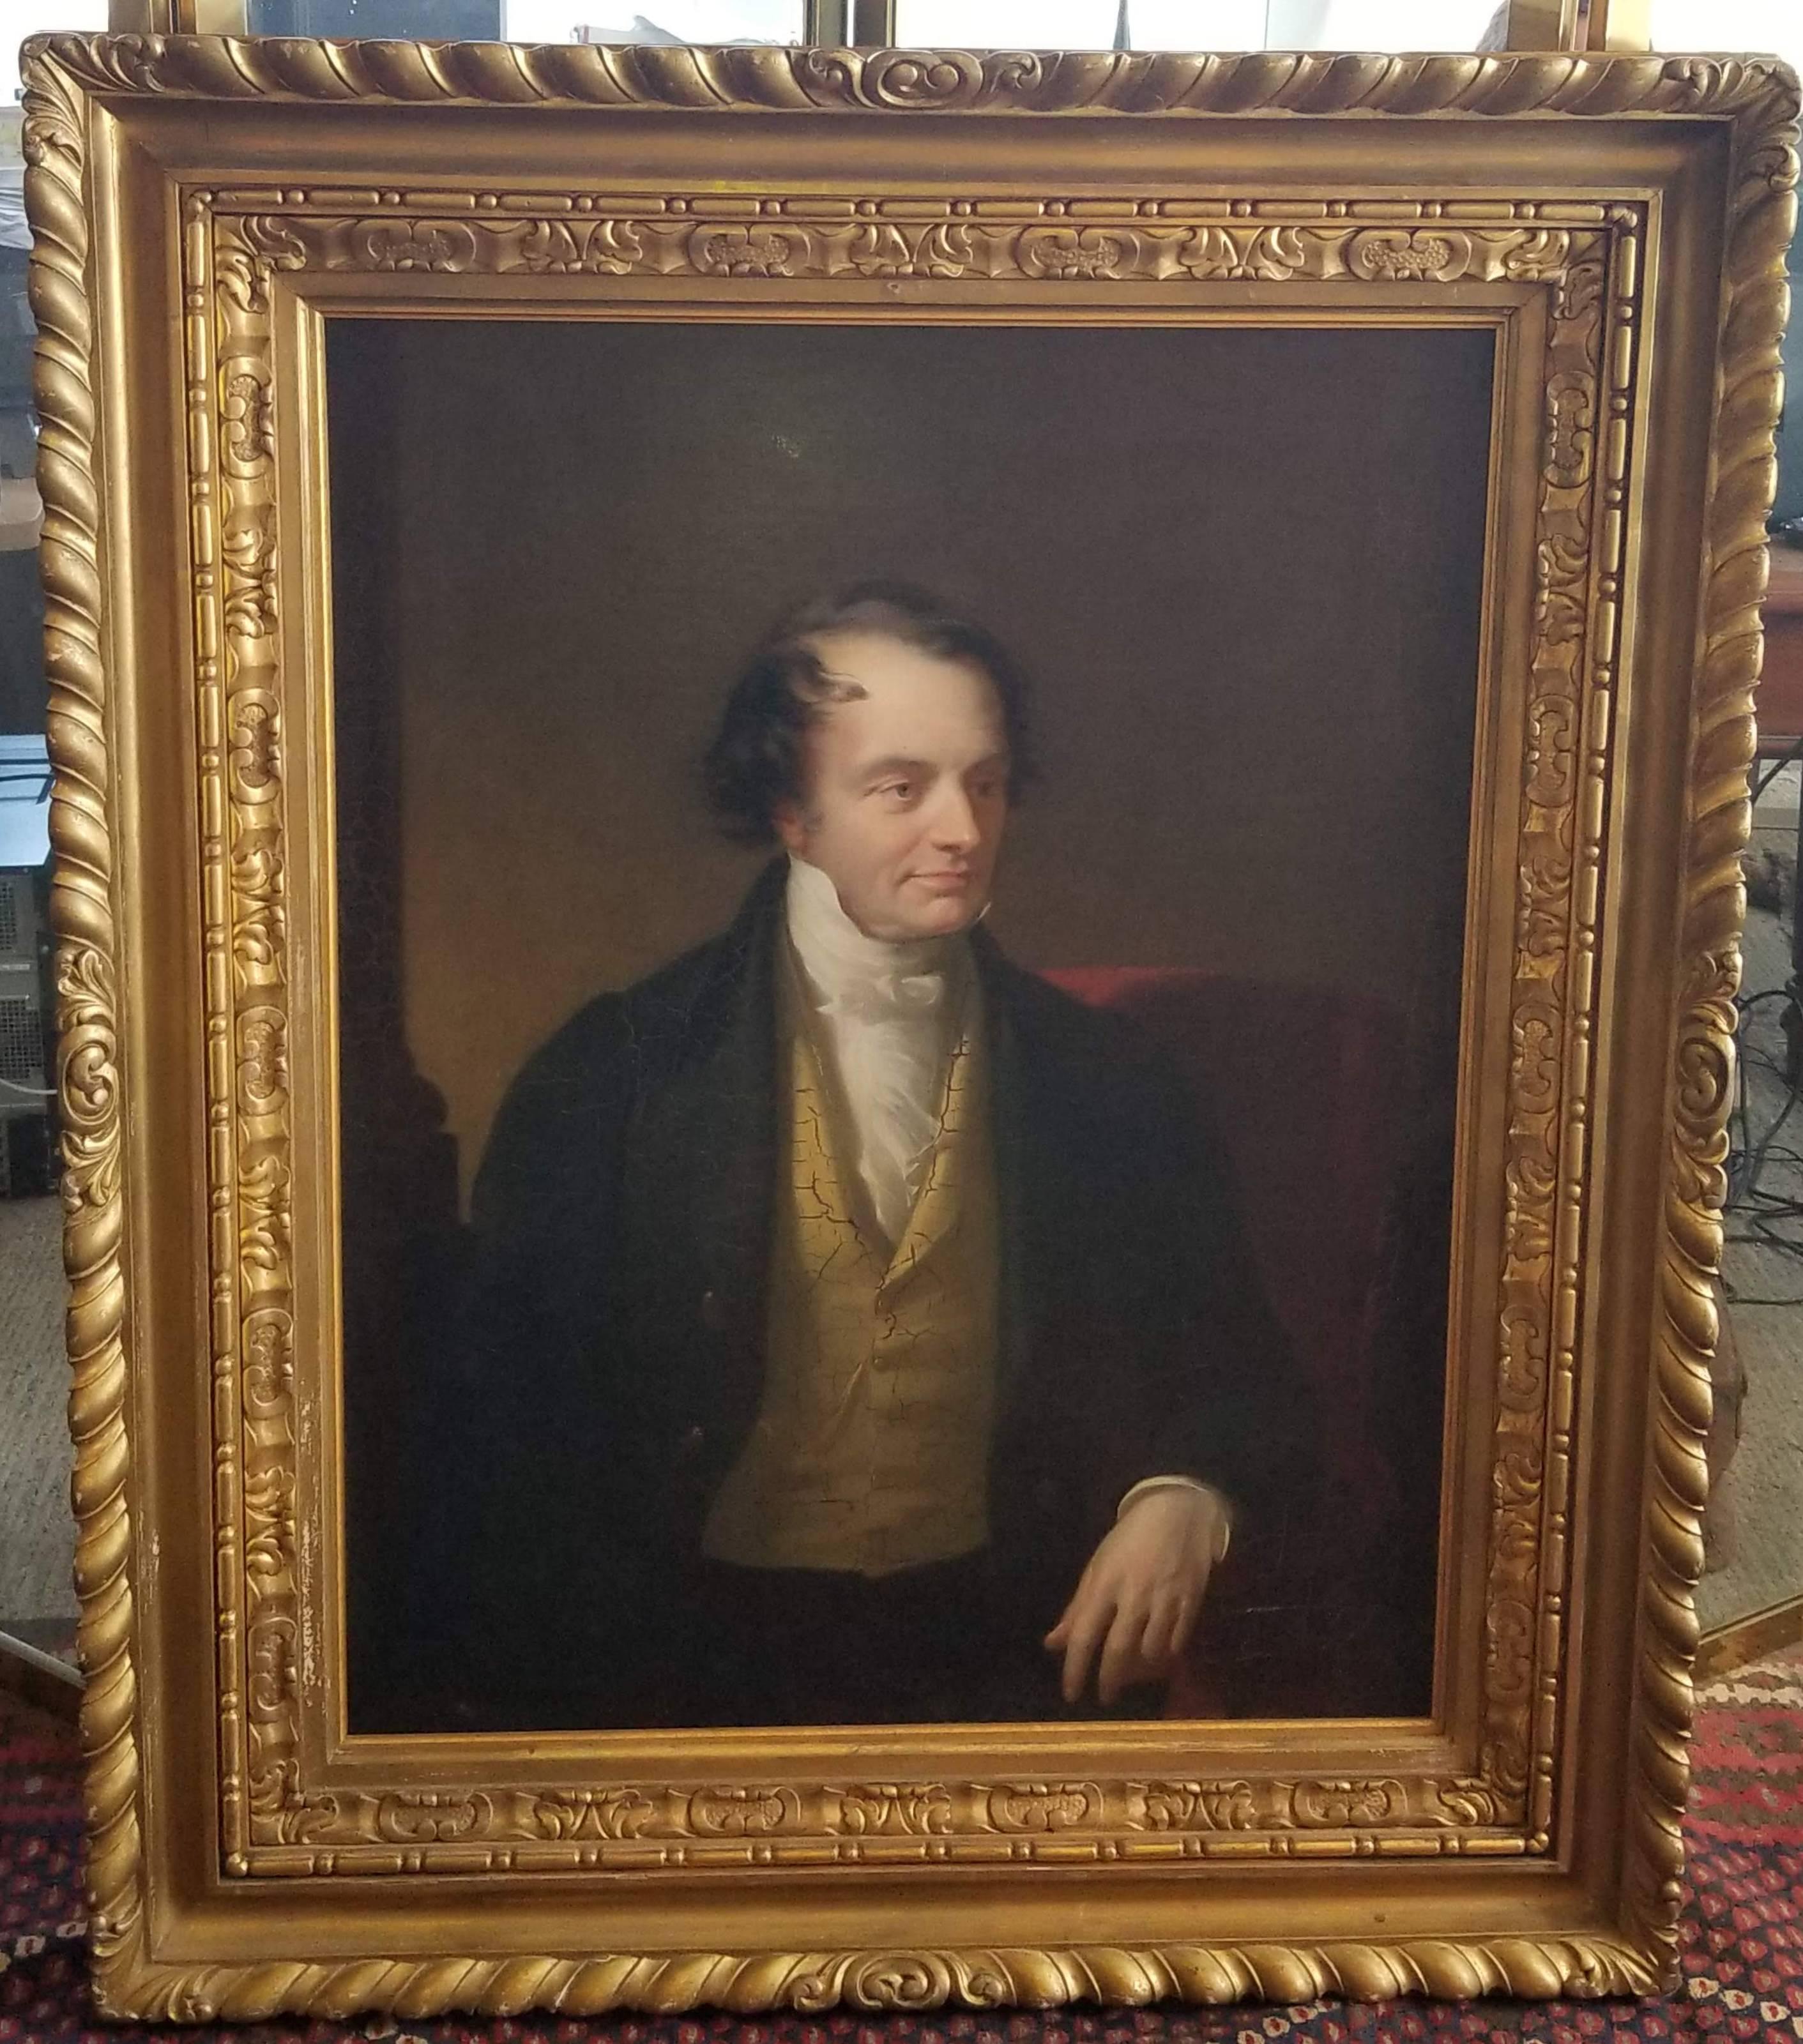 A very well-painted oil on canvas portrait of a gentleman, businessman or politician, from the late 18th or early 19th century. An American painter, unsigned, and an extremely well-executed painting in wonderful condition. It is contained by a